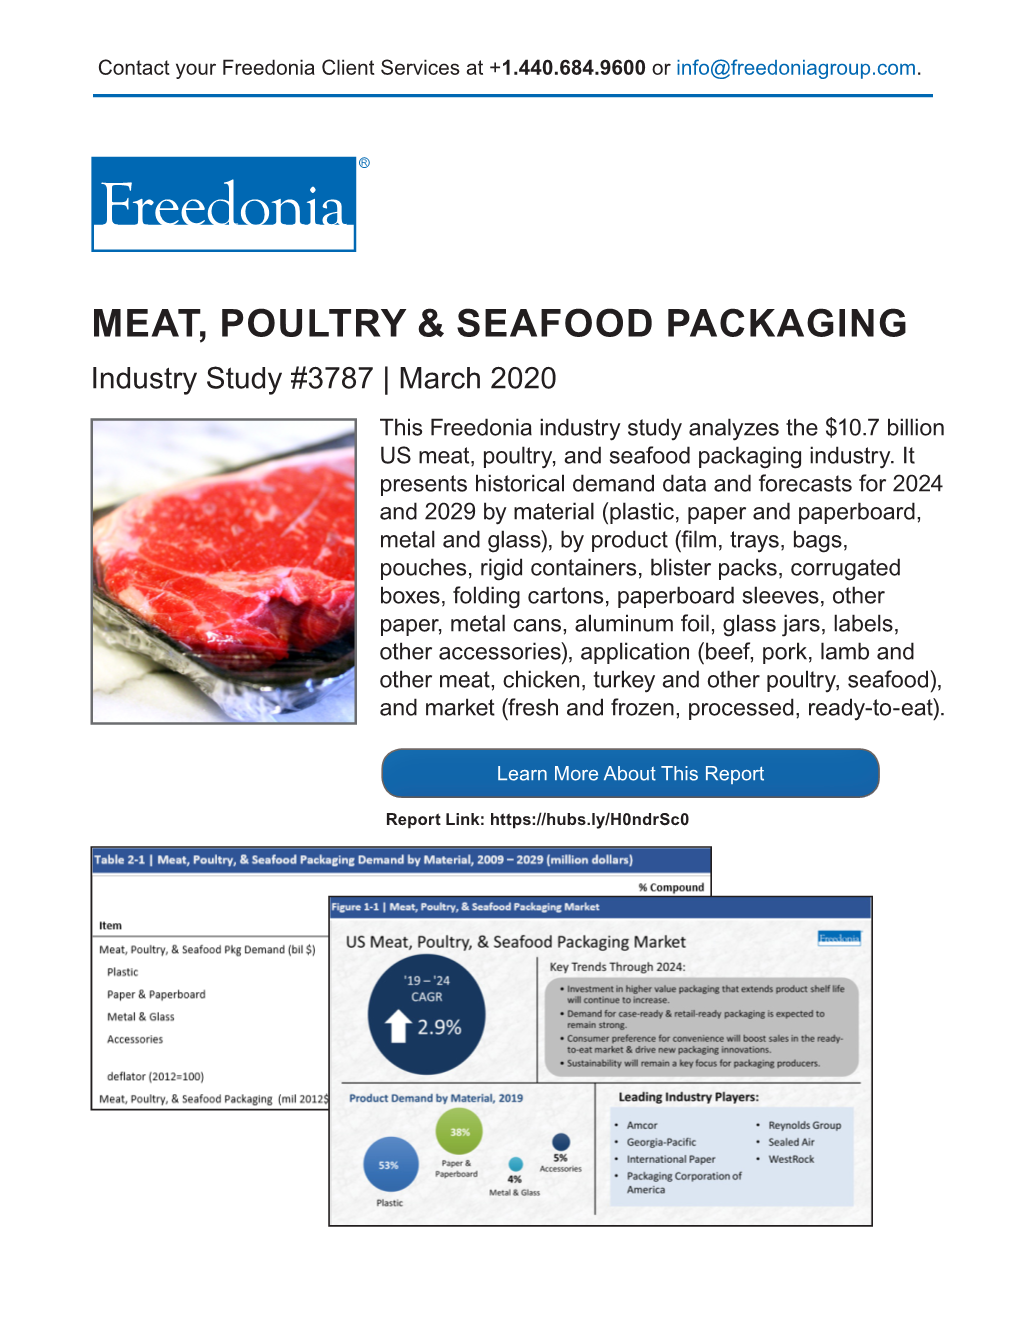 Meat, Poultry & Seafood Packaging